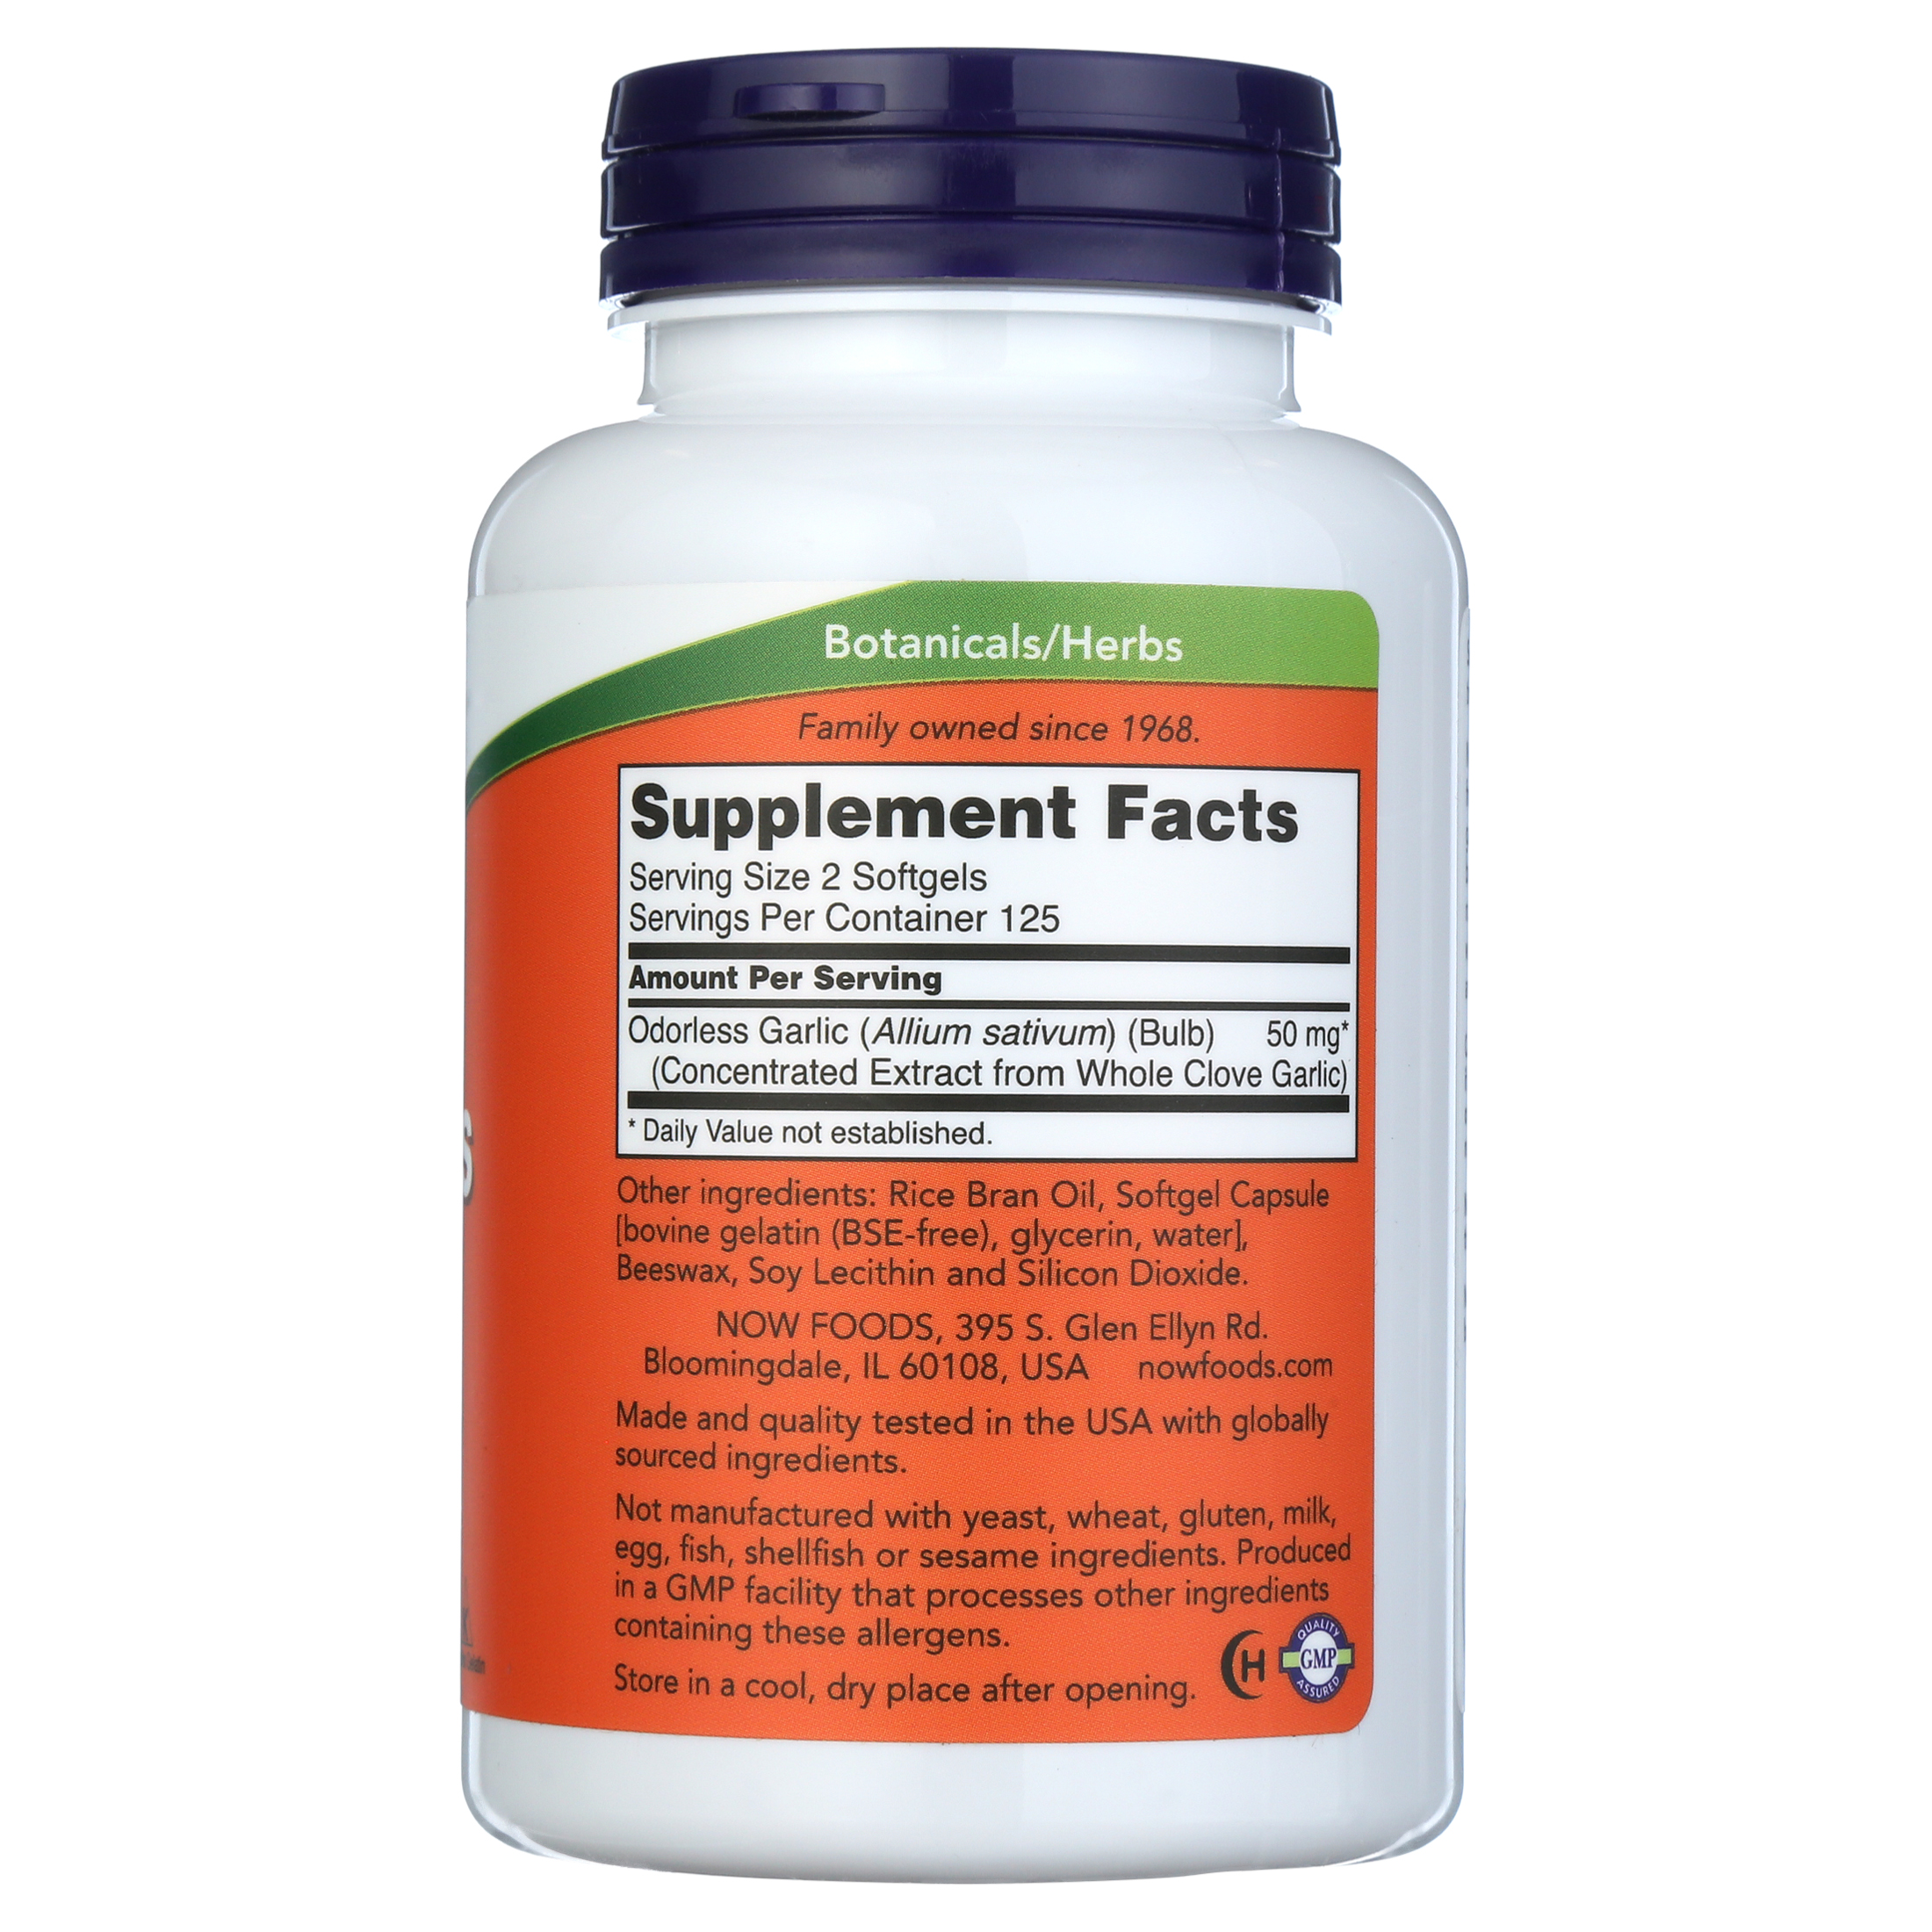 NOW Odorless Garlic Concentrated Extract Capsules (250)